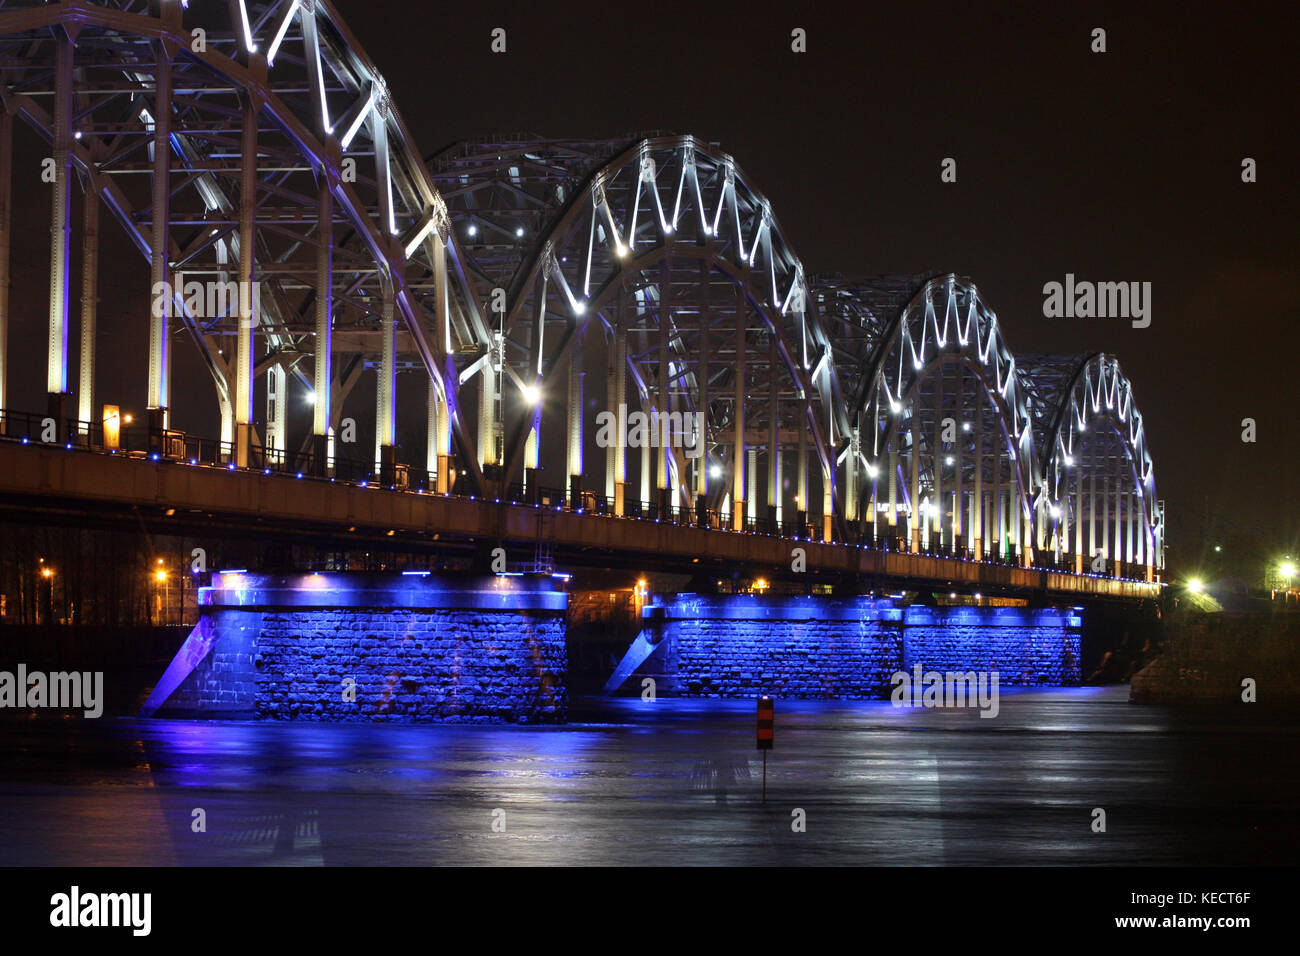 Railway bridge at night with white-blue illumination, reflection in the river. Stock Photo